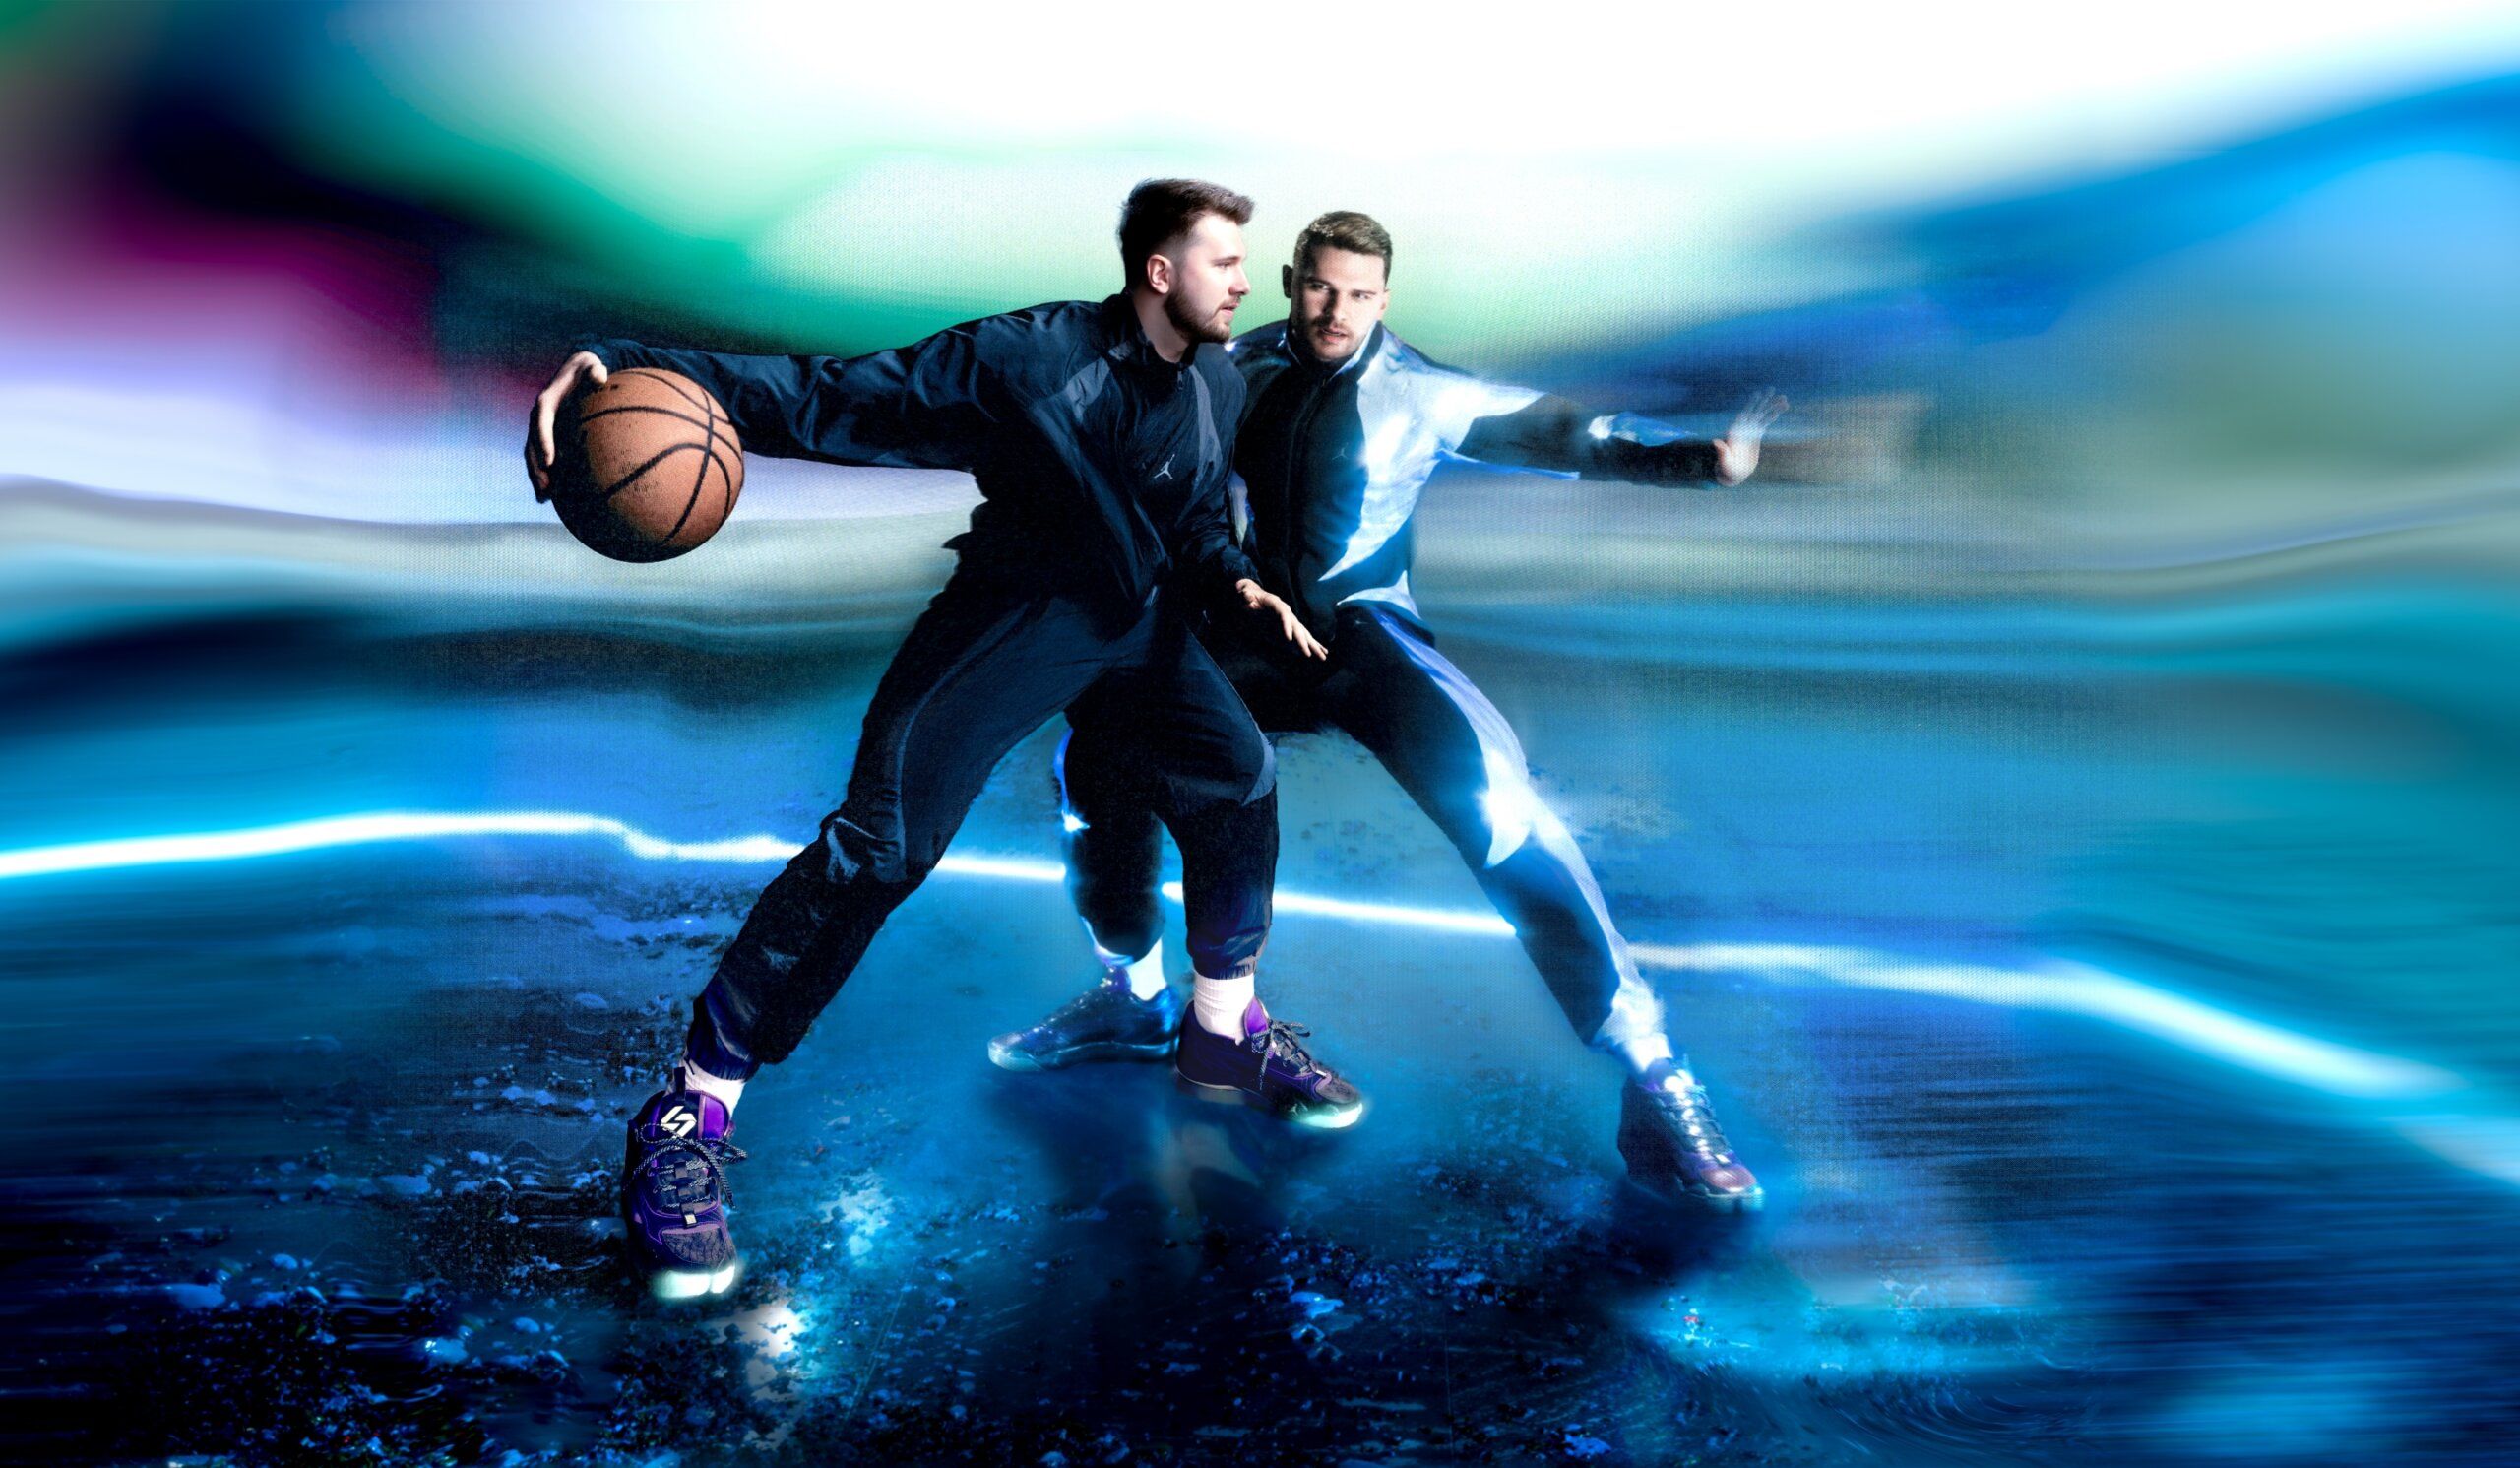 Luka playing Luka one on one basketball. Background is highly stylized computer glowing look.